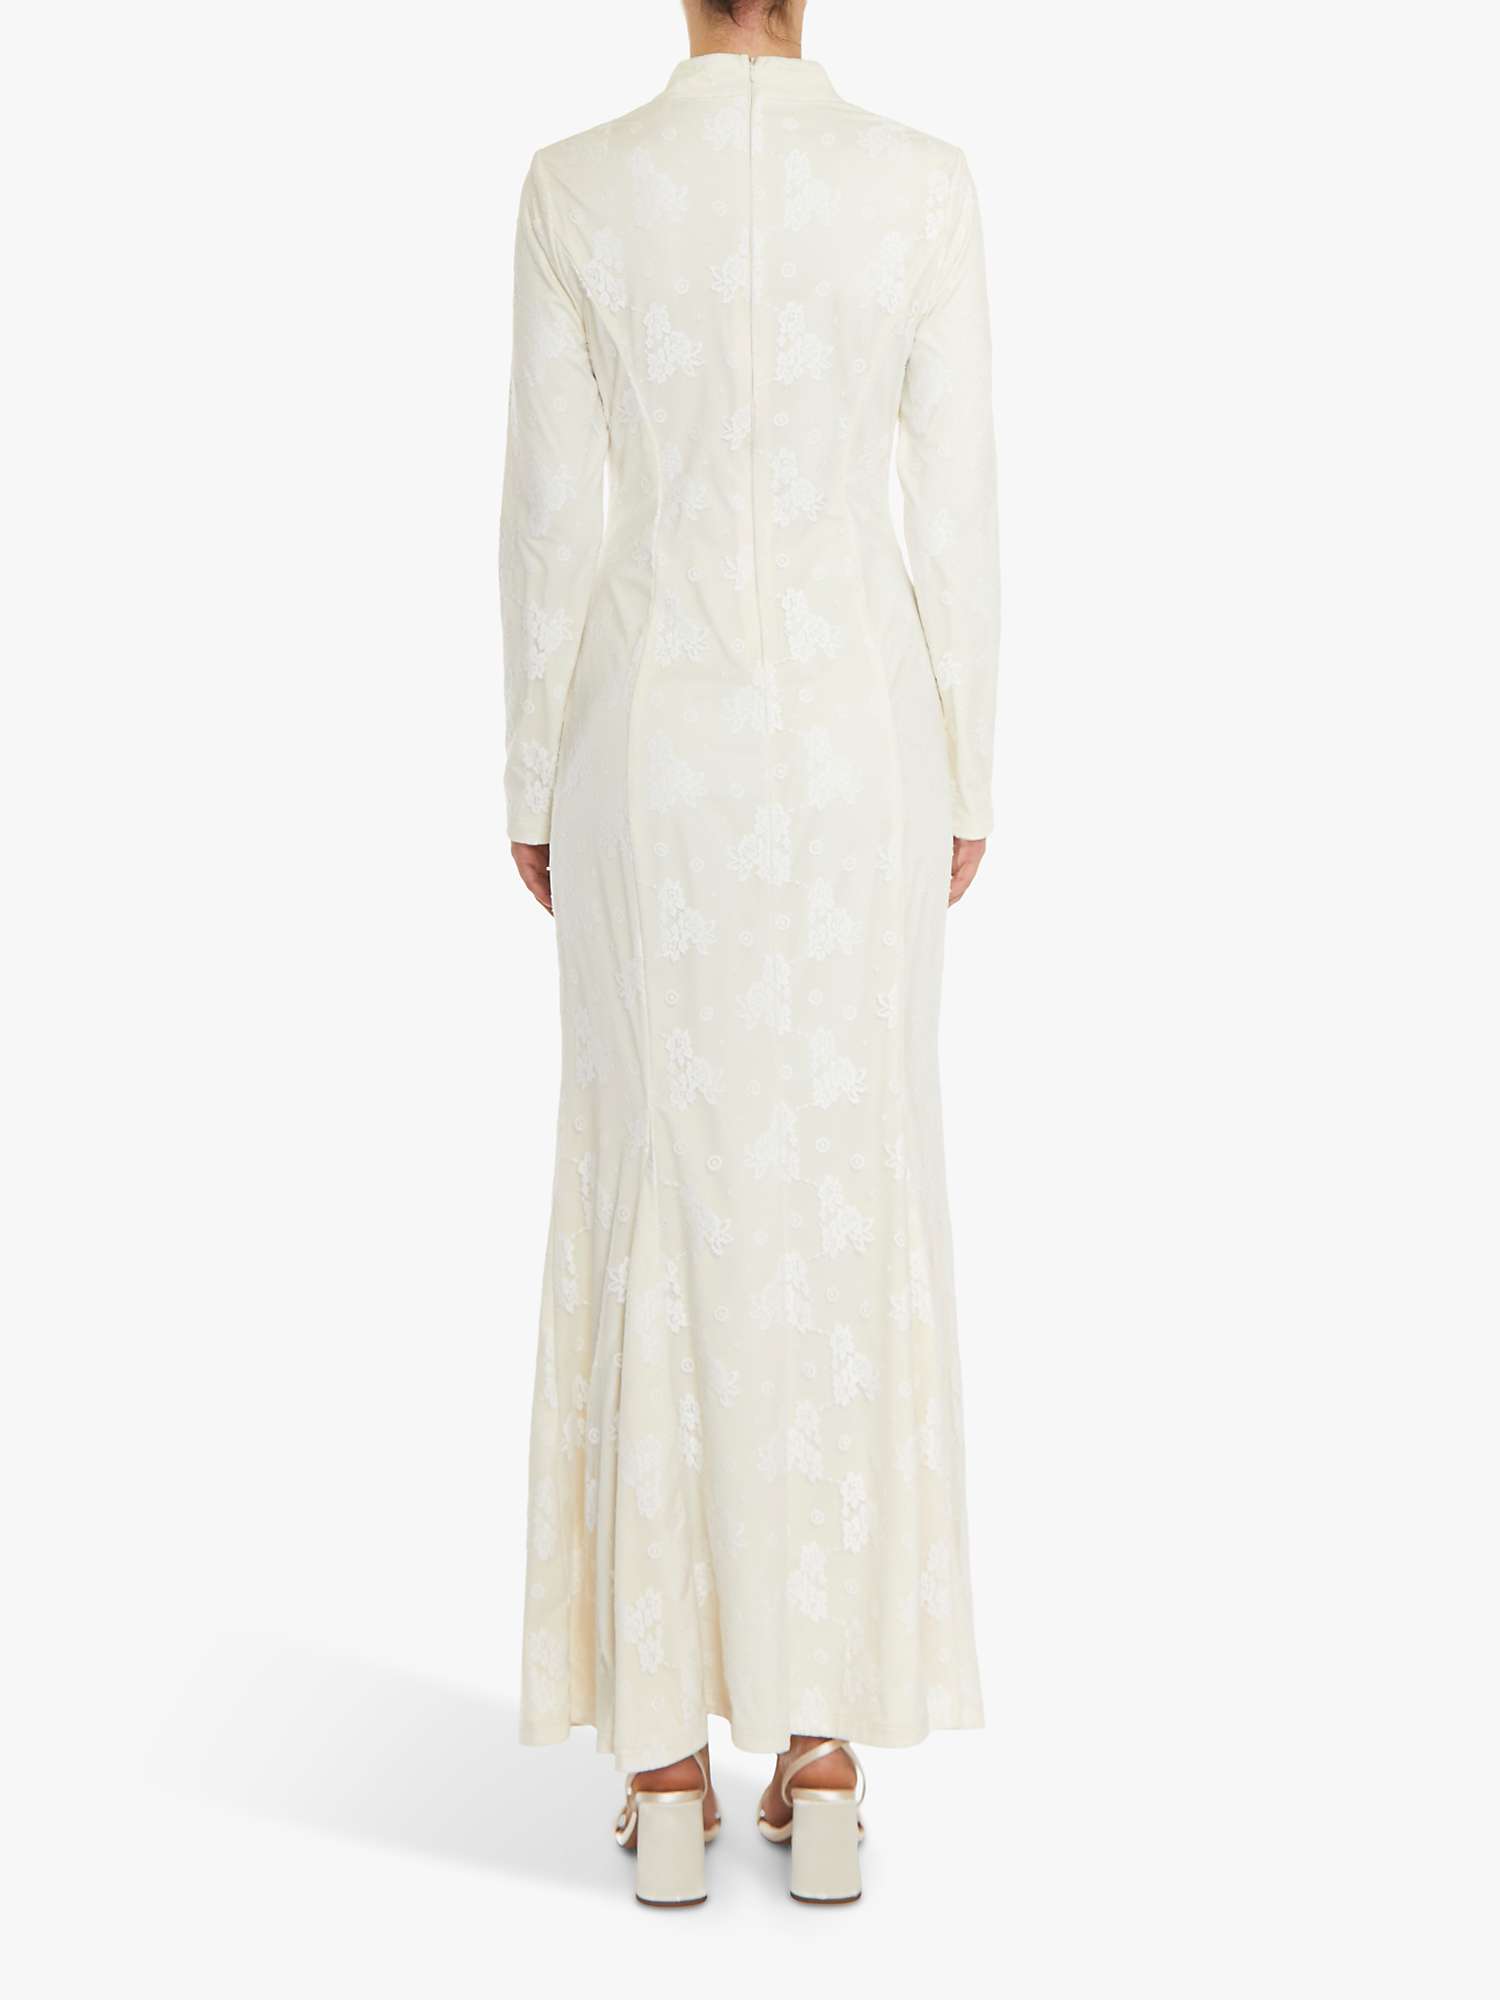 Buy True Decadence Serenity Lace High Neck Maxi Dress, White Online at johnlewis.com